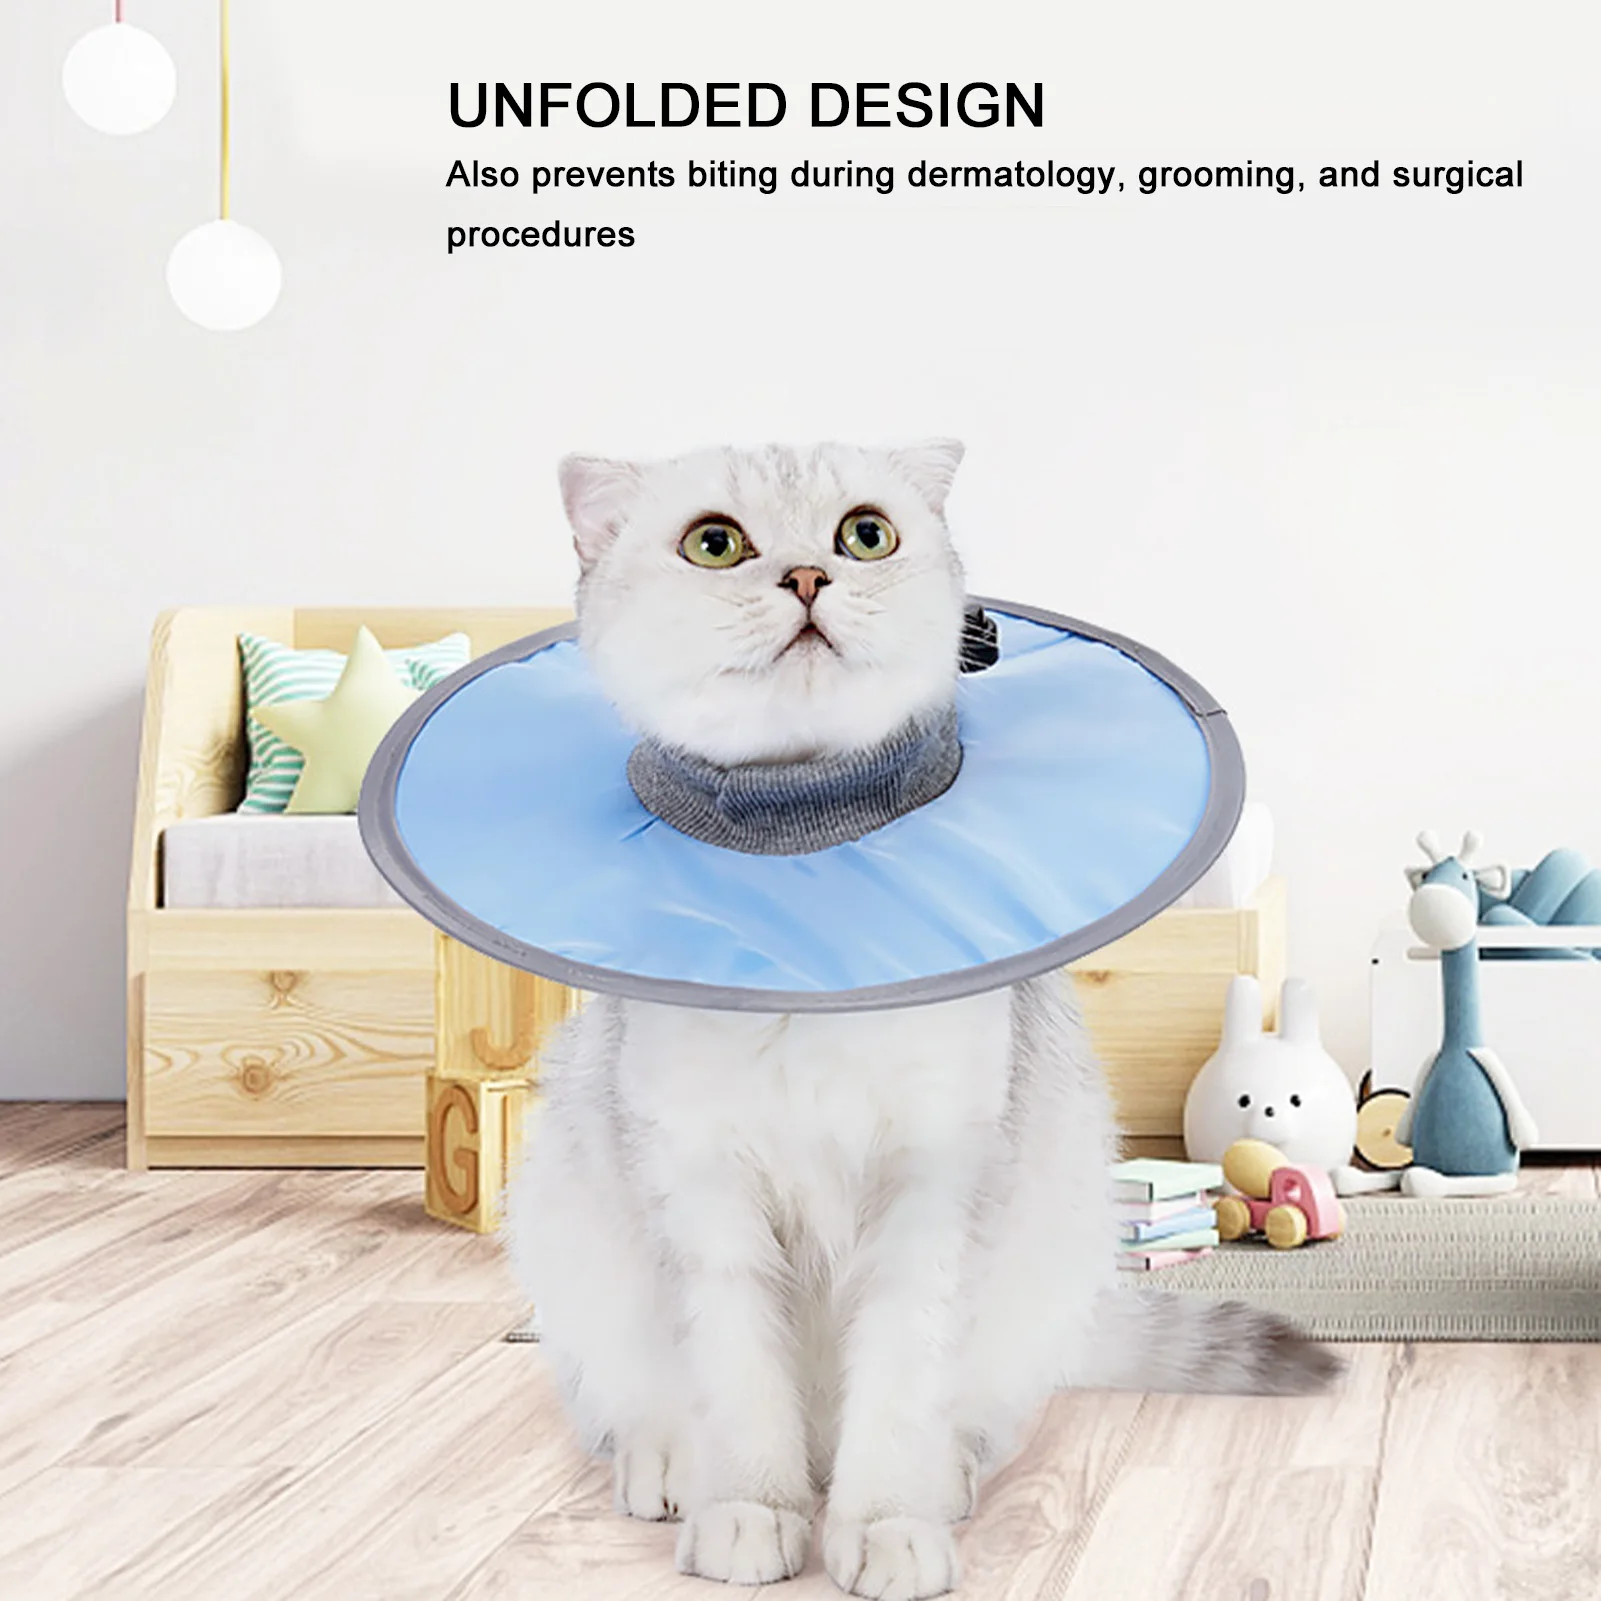 Cat Recovery Collar Waterproof Adjustable Prevent Licking Protective Pet Elizabeth Collar For Post Surgery Fruit Green M e collar soft cotton cat elizabethan collar neck cone recovery sleeve anti bite lick surgery wound healing protective